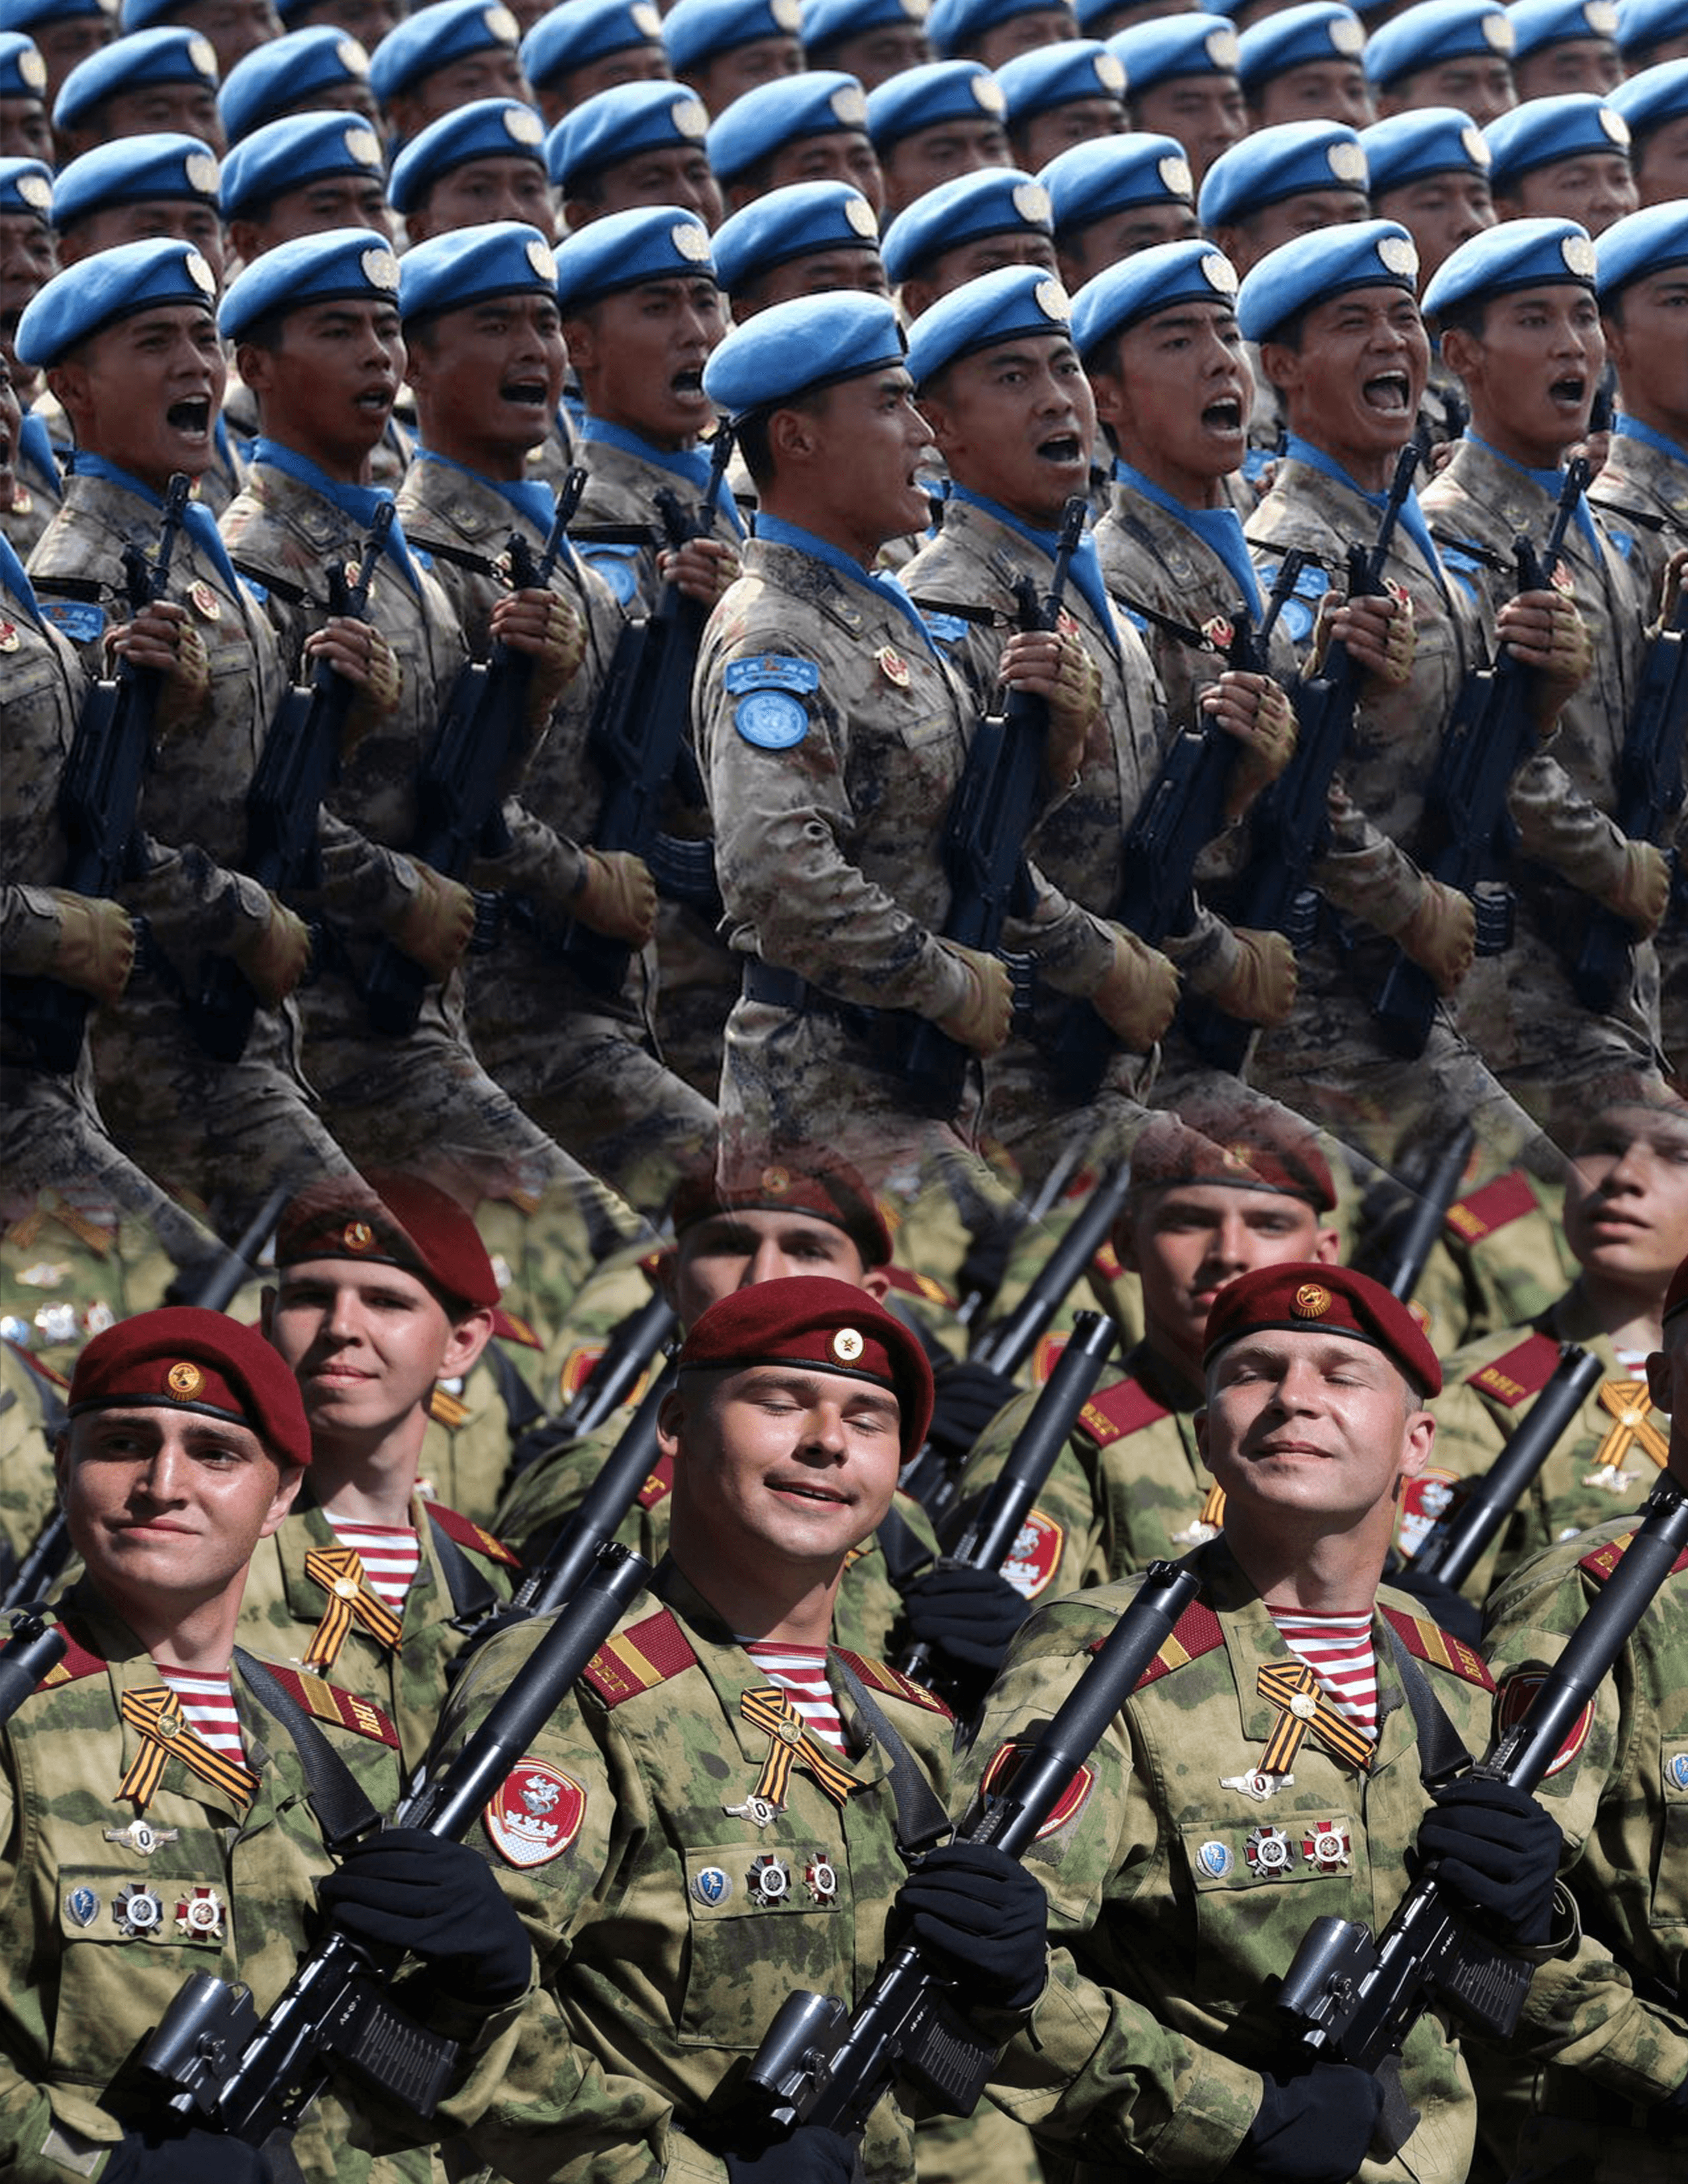 Russia’s Historical Defense Ties and China’s Rising Military Presence in Central Asia